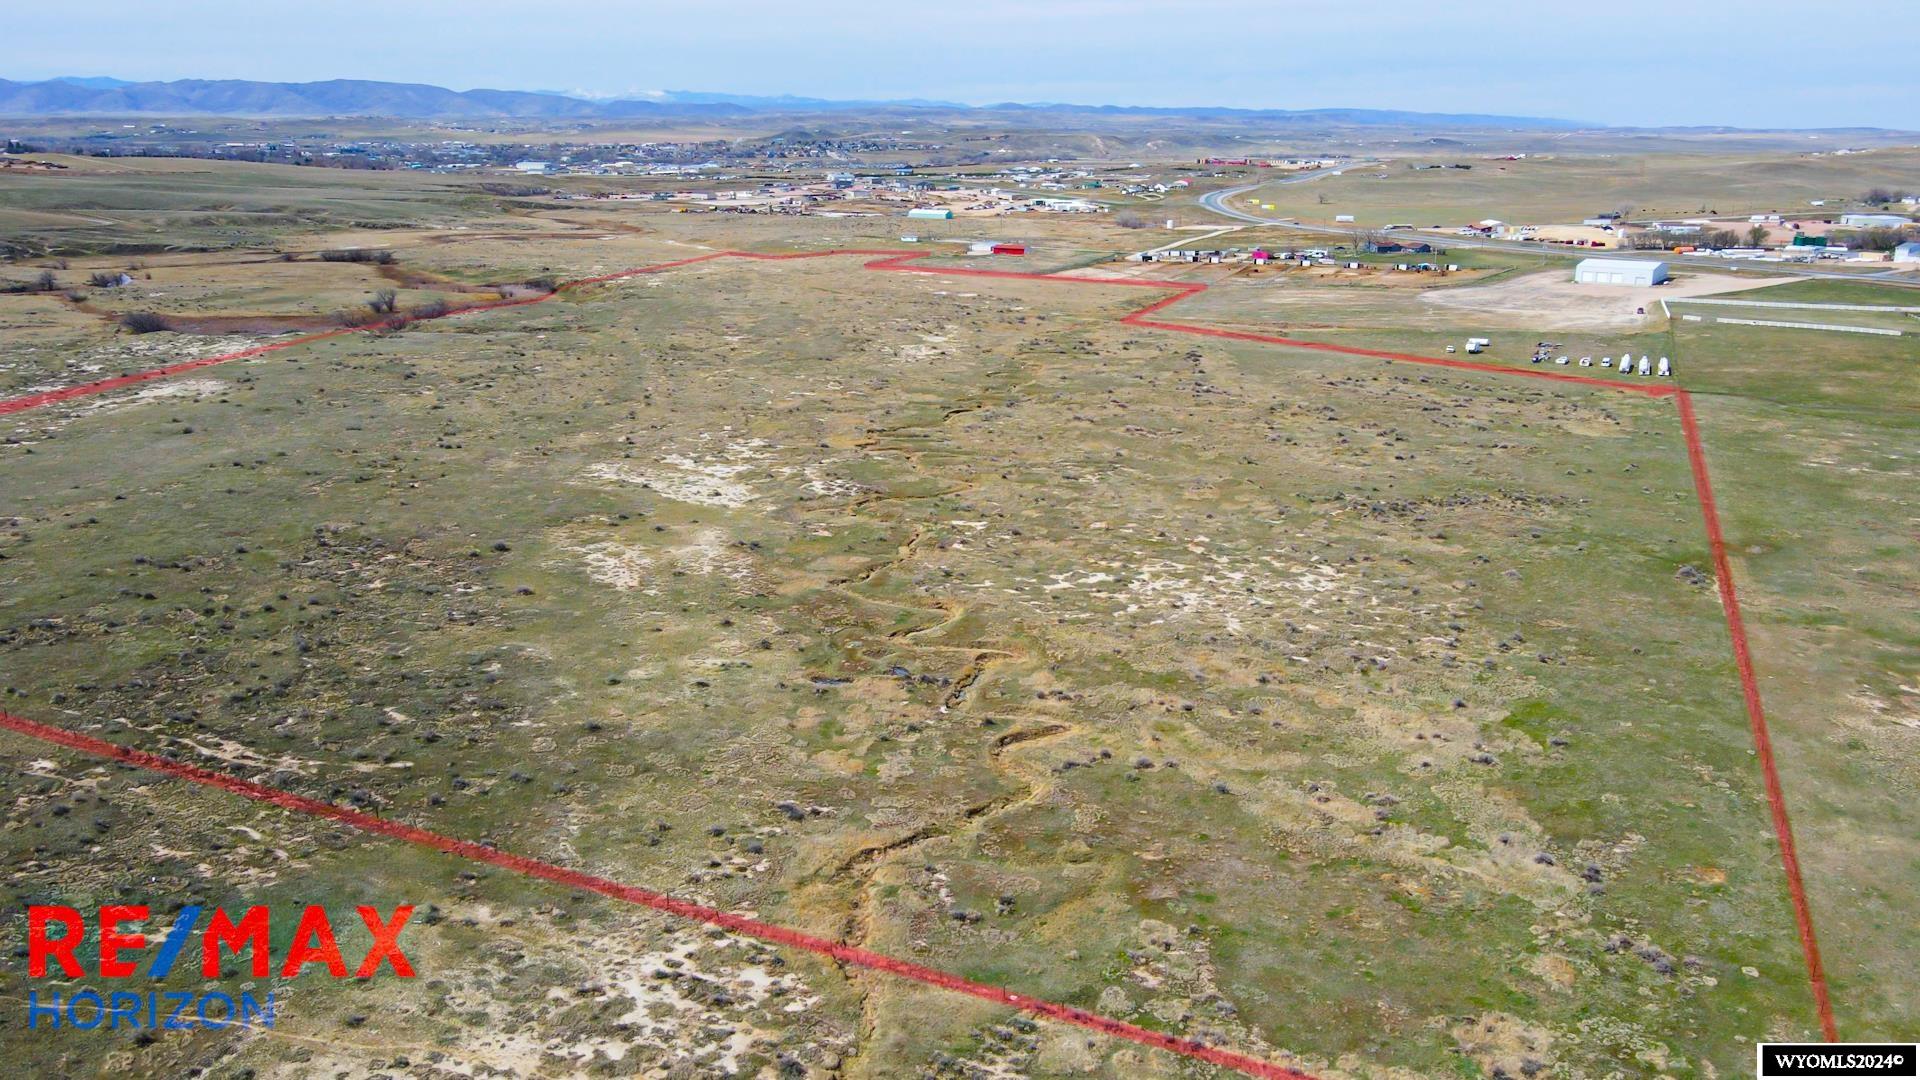 Unlock the potential of these 49.19 commercial acres with 3-phase electrical already available. Prime location offers ease of access and visibility. Explore the income potential through subdivision, with the added convenience of an existing easement. Don't miss out on this exceptional opportunity! Call Cody (307)351-1662 or Madeline (253)441-0310 at RE/MAX today!